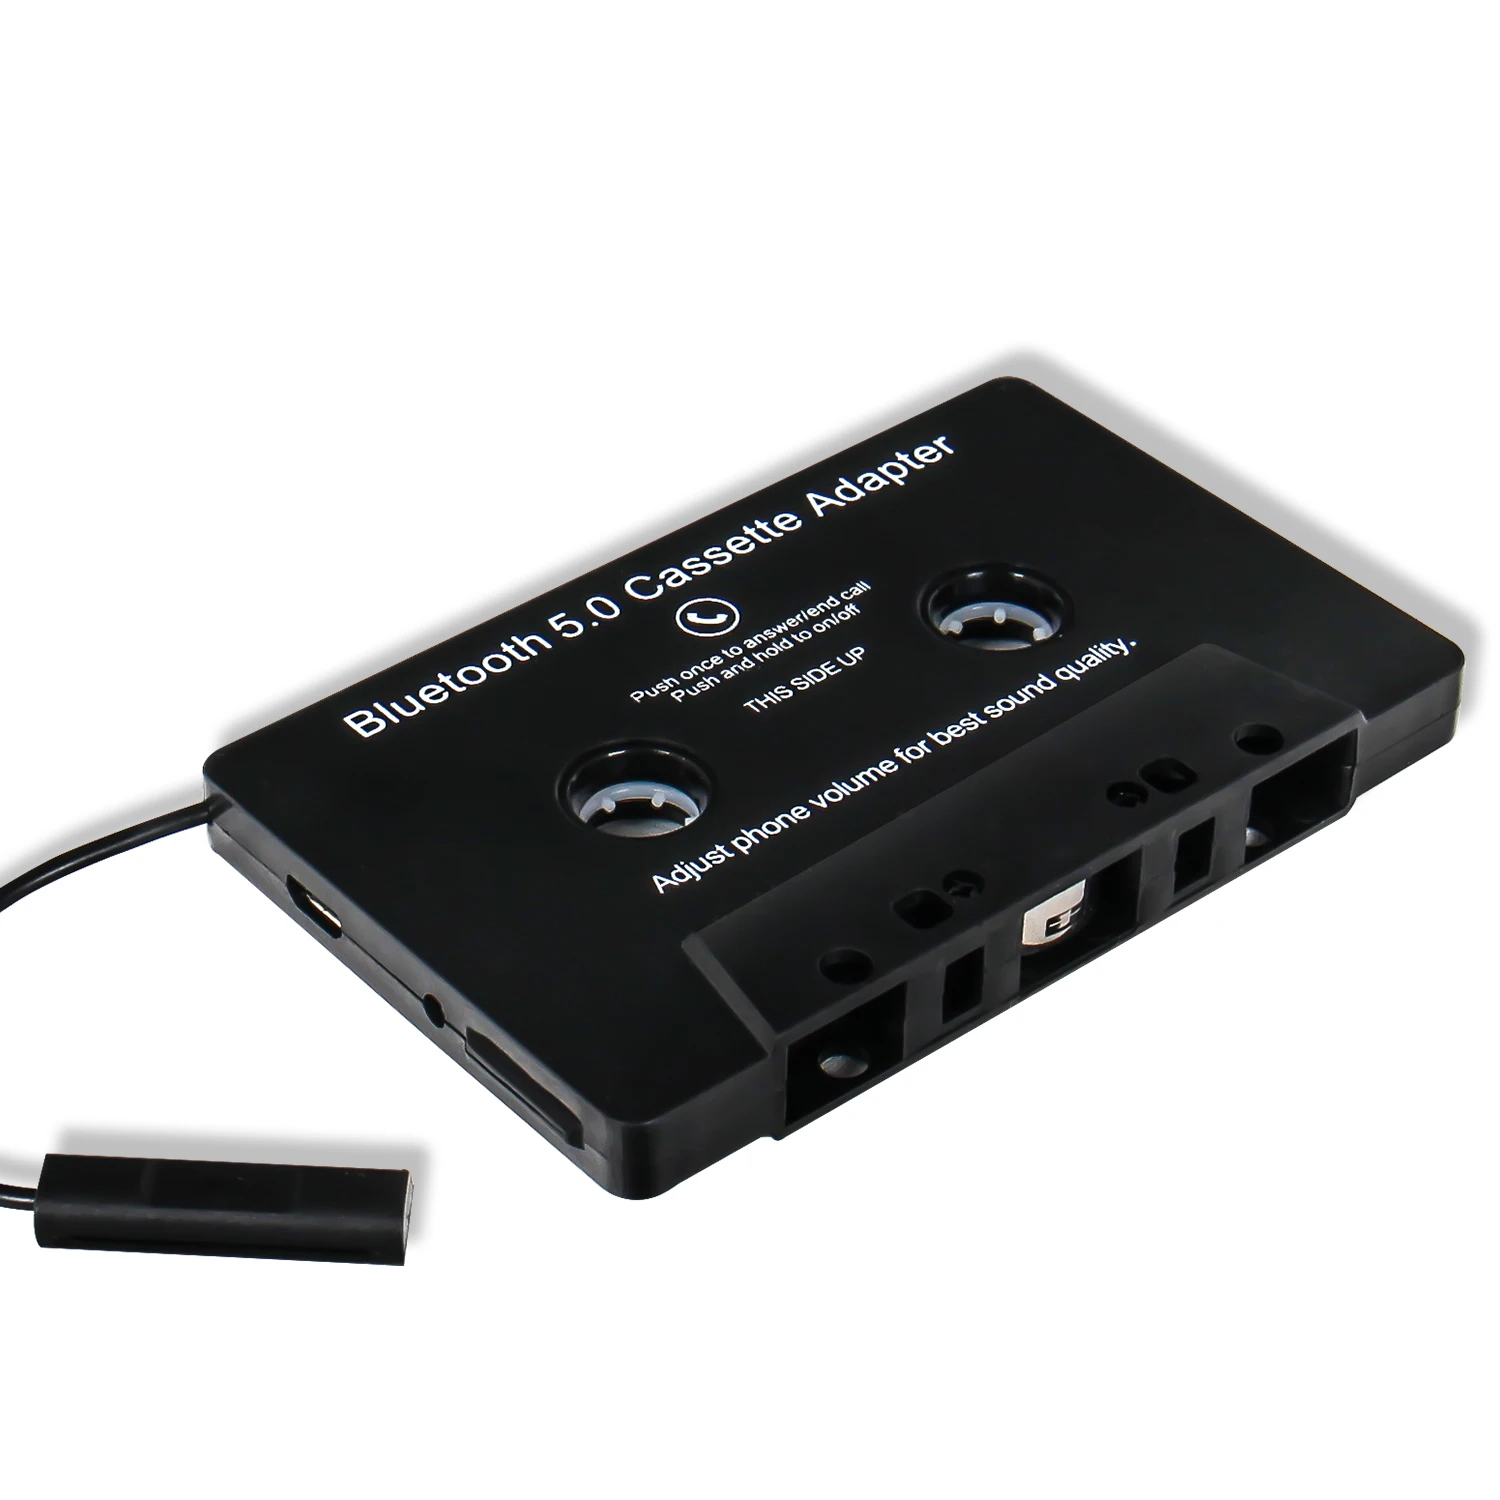 
Auto Universal In Car BT Cassette Adapter for iPod, MP3,MP4,CD,Mobile Phone  (1600072684632)